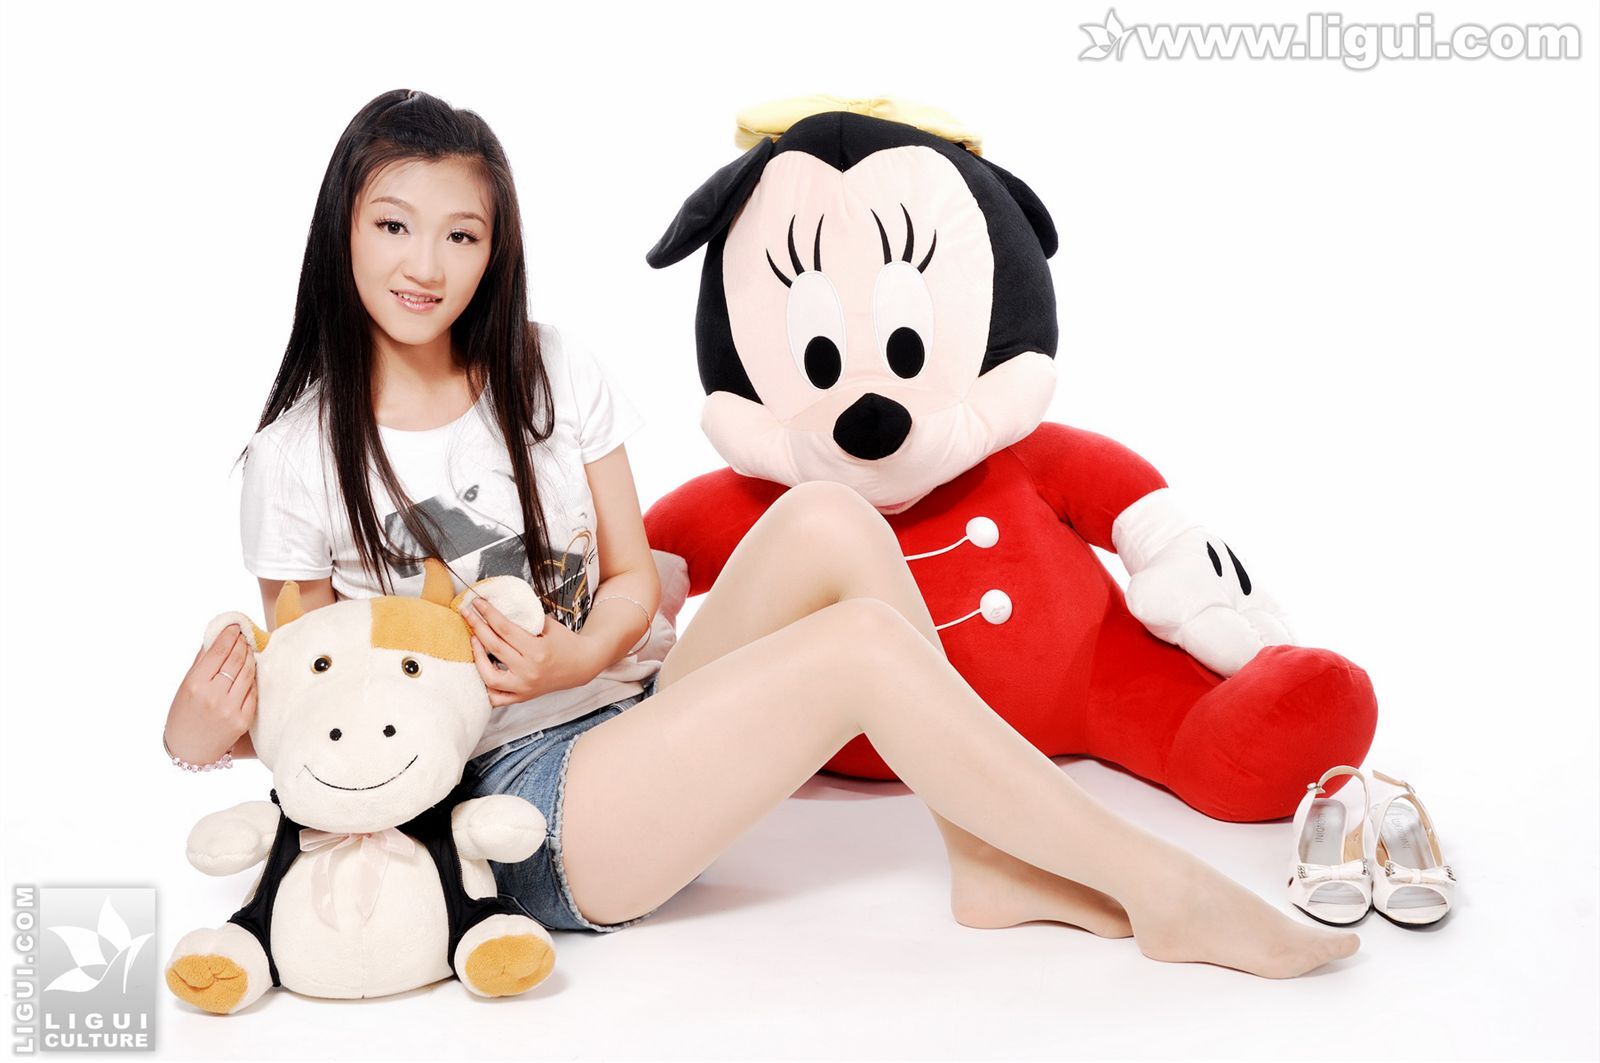 Xiaoqian and the doll